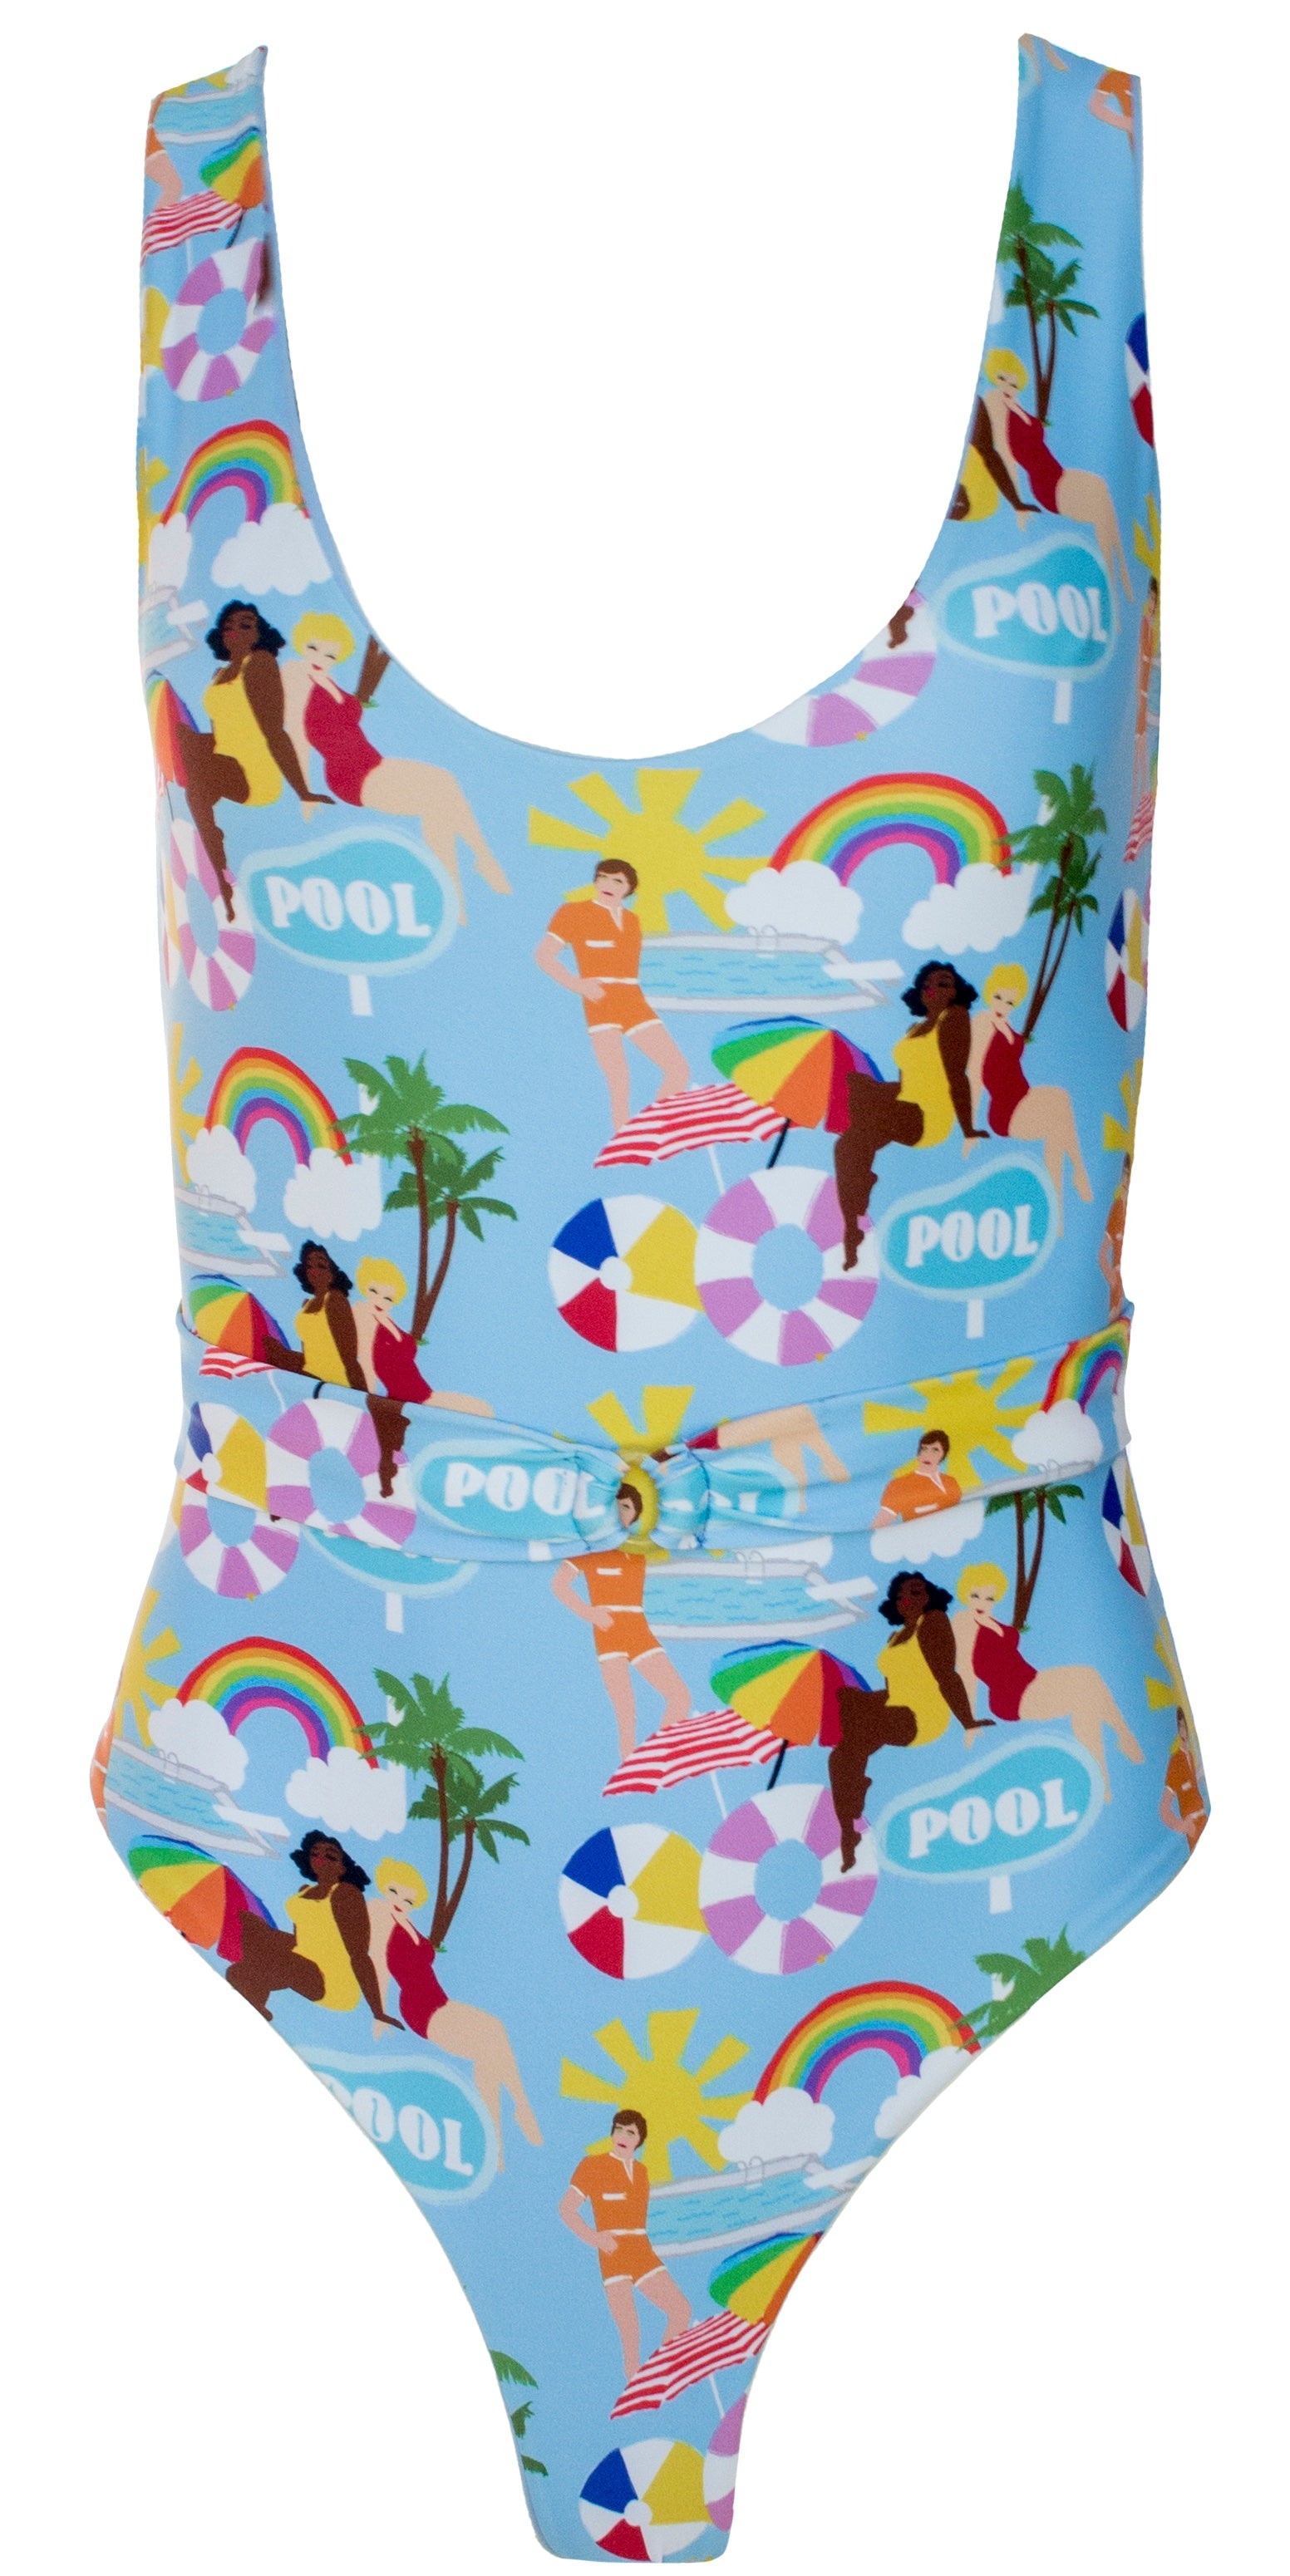 Poolside Printed One Piece